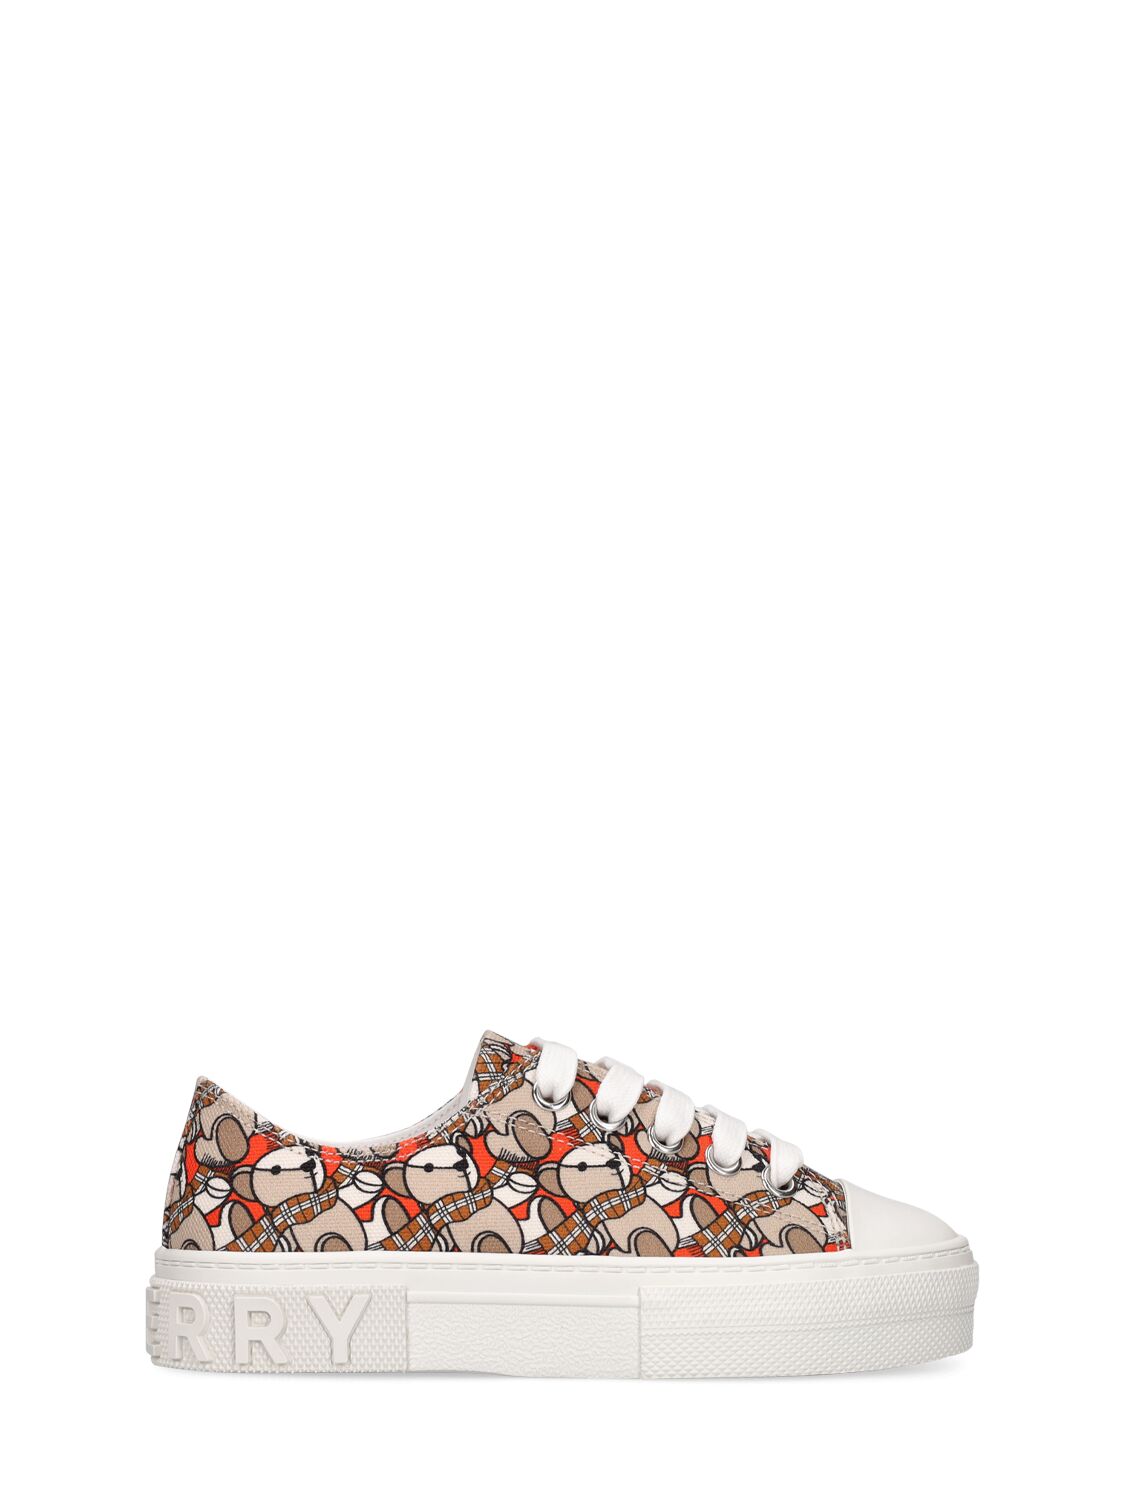 Burberry Kids' Monogram Print Cotton Lace-up Sneakers In Multicolor